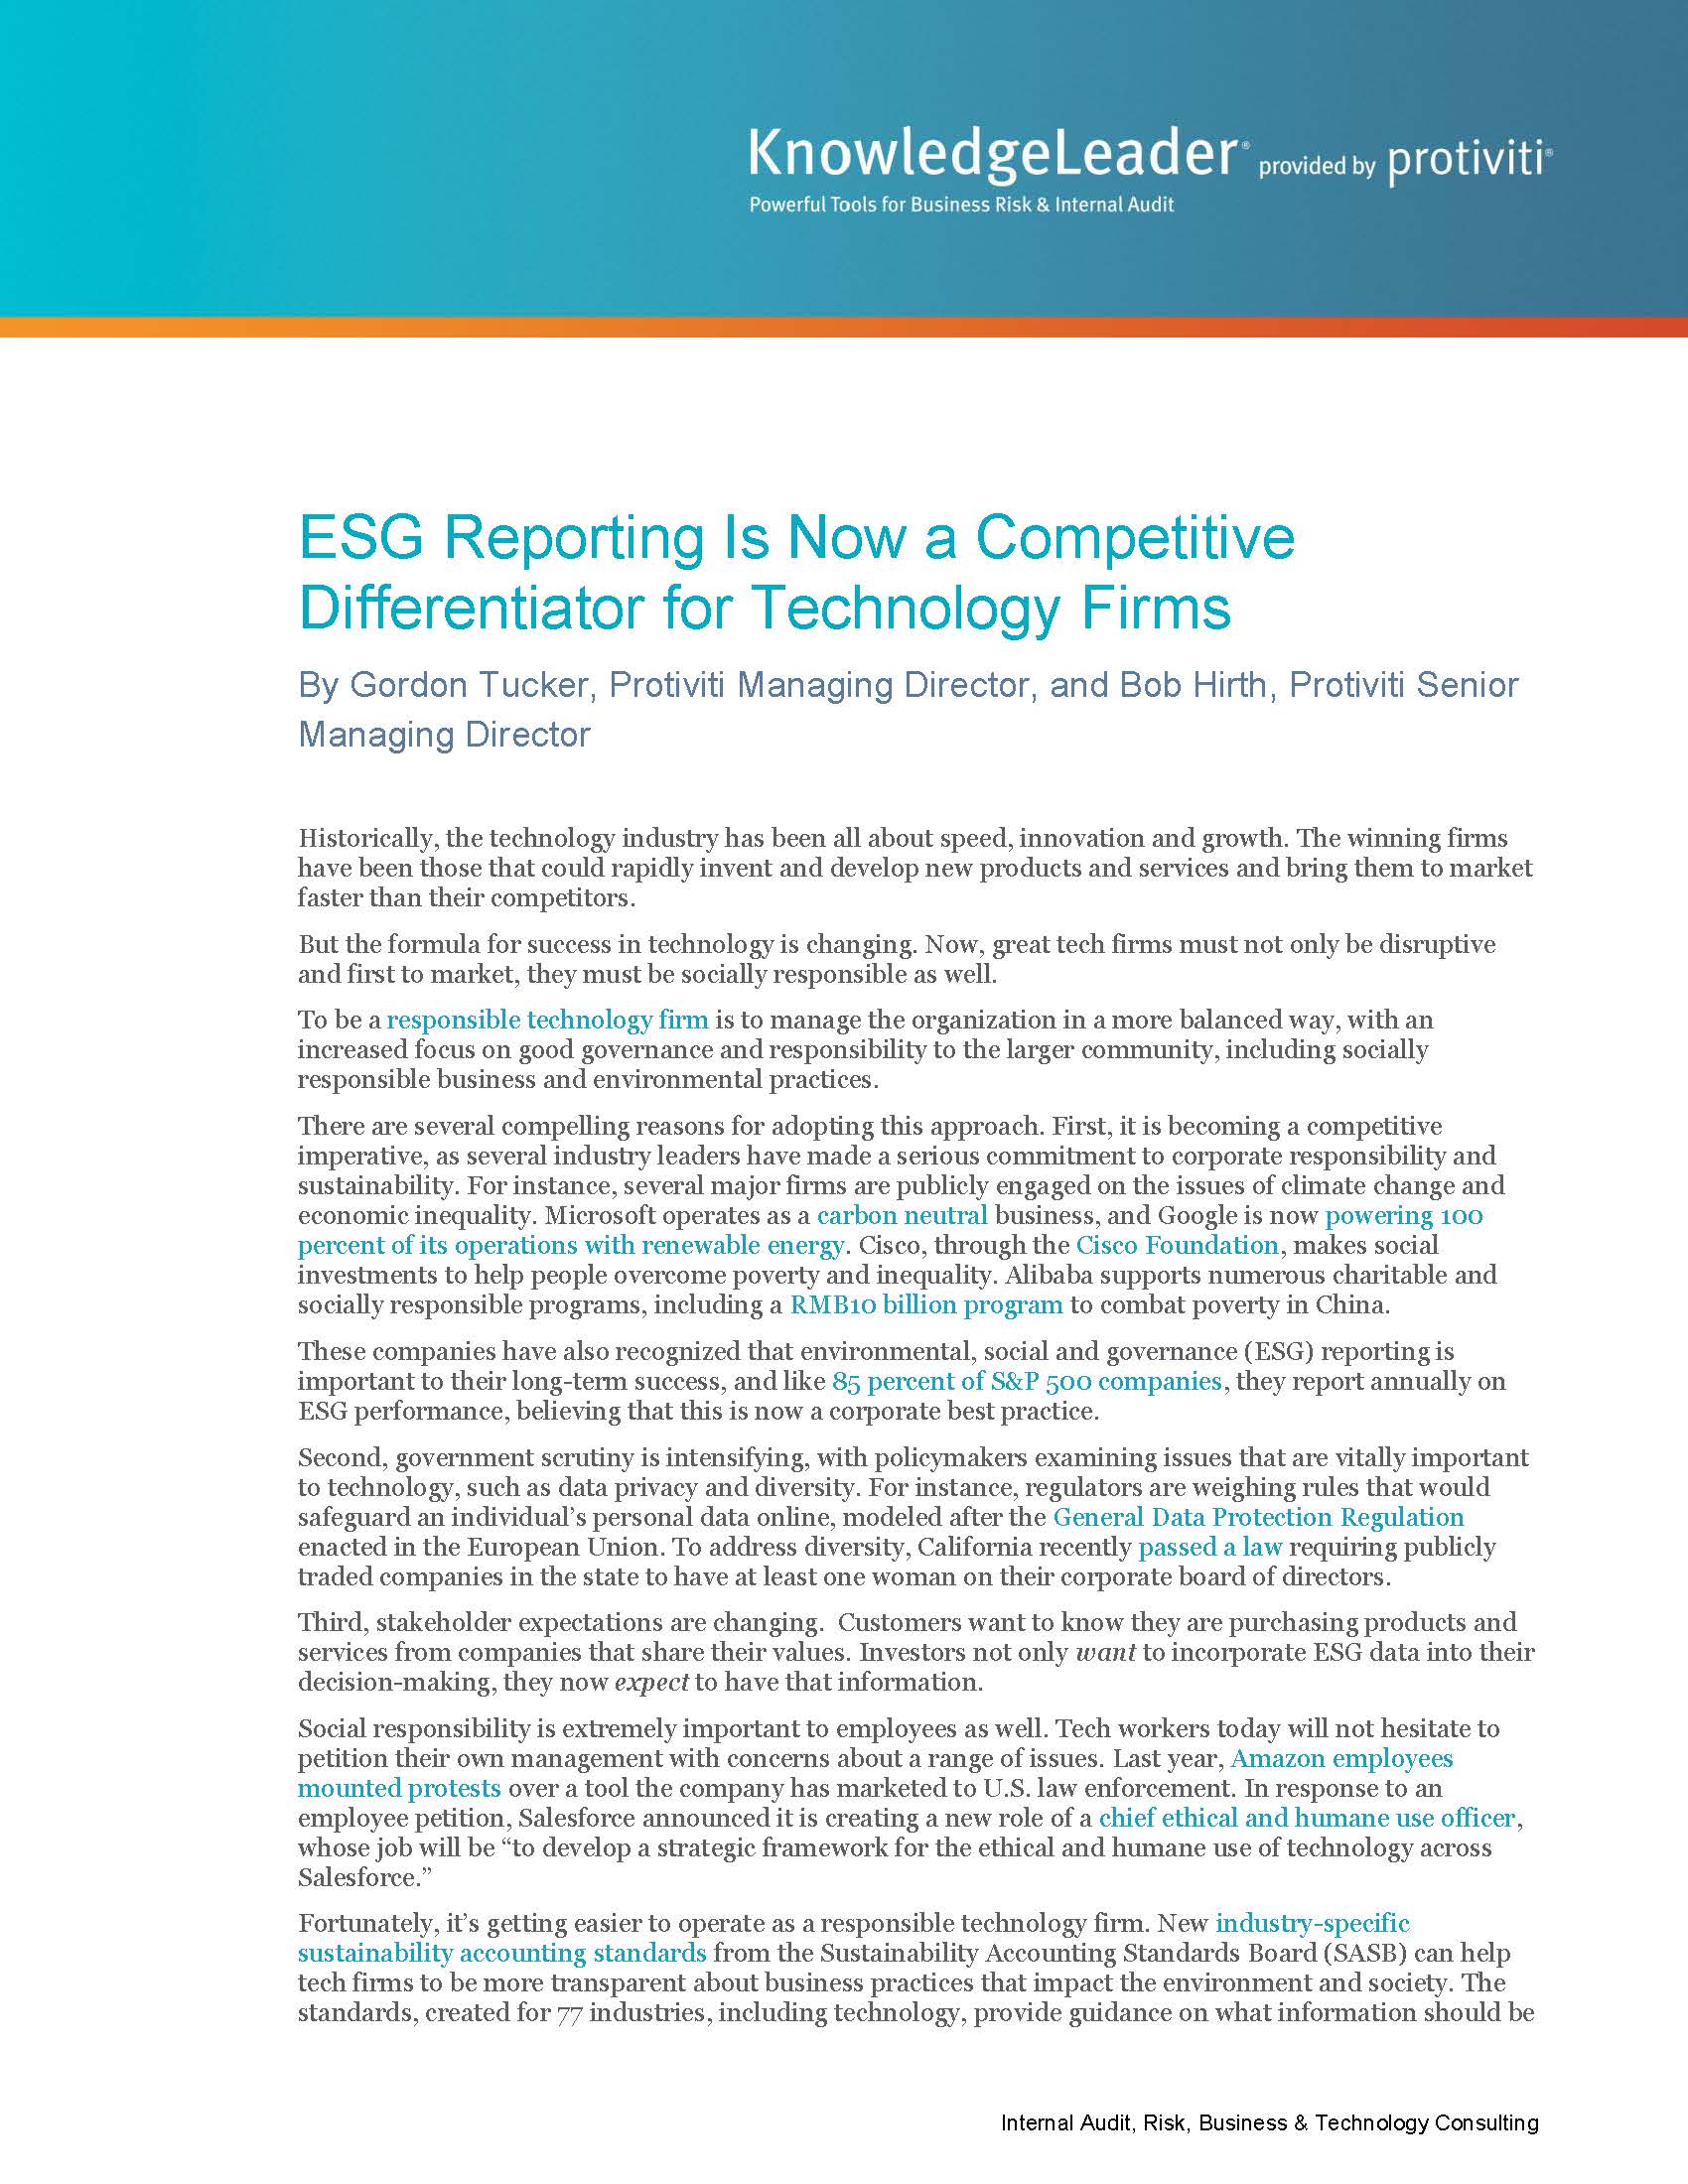 Screenshot of the first page of ESG Reporting Is Now a Competitive Differentiator for Technology Firms